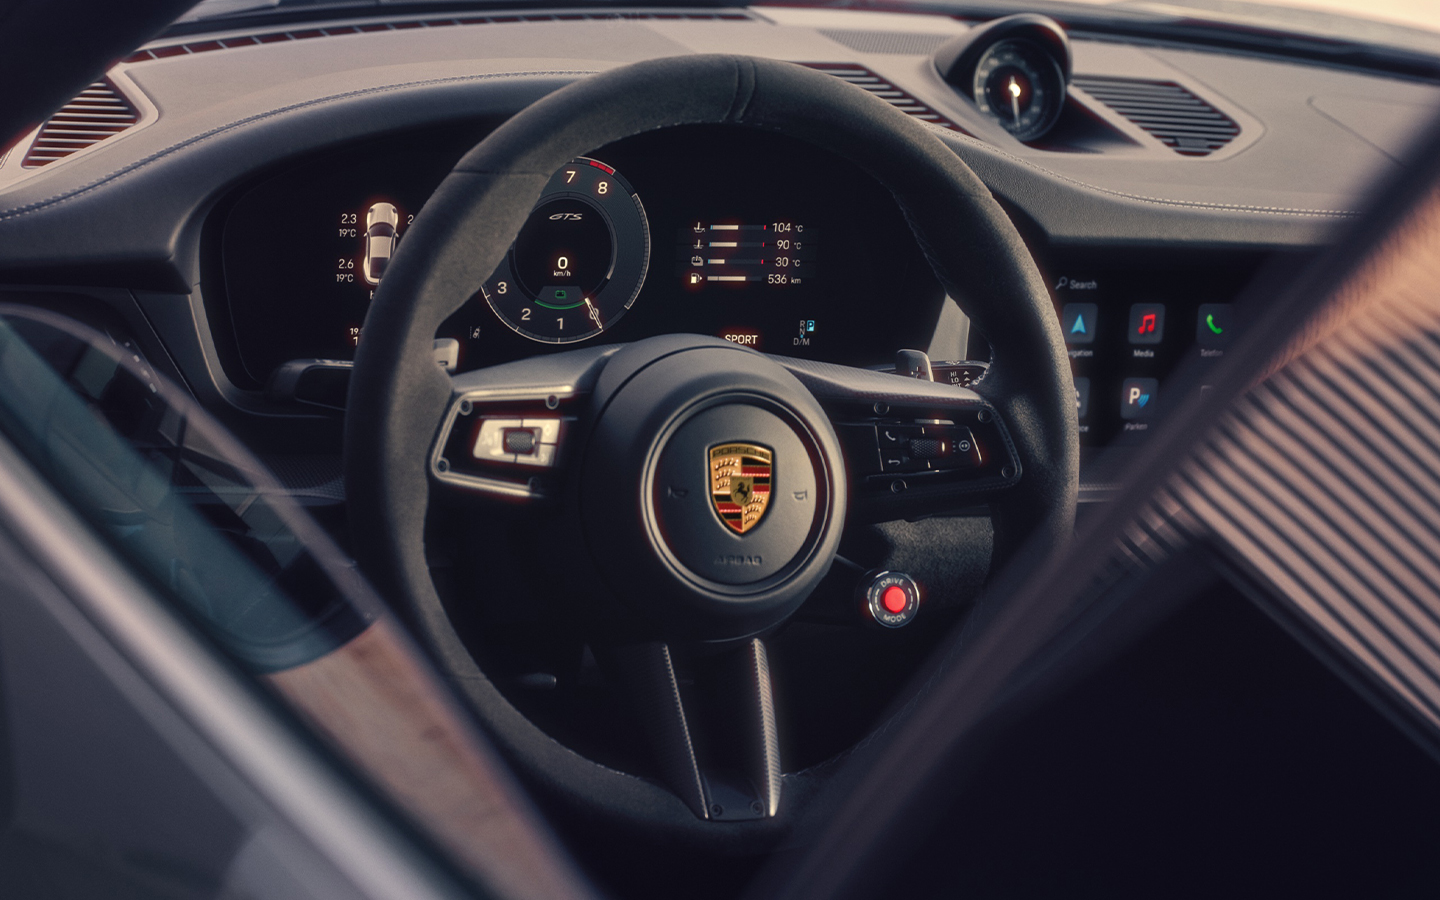 Cockpit of Porsche 911 (992.2) showing 12.65-inch curved display